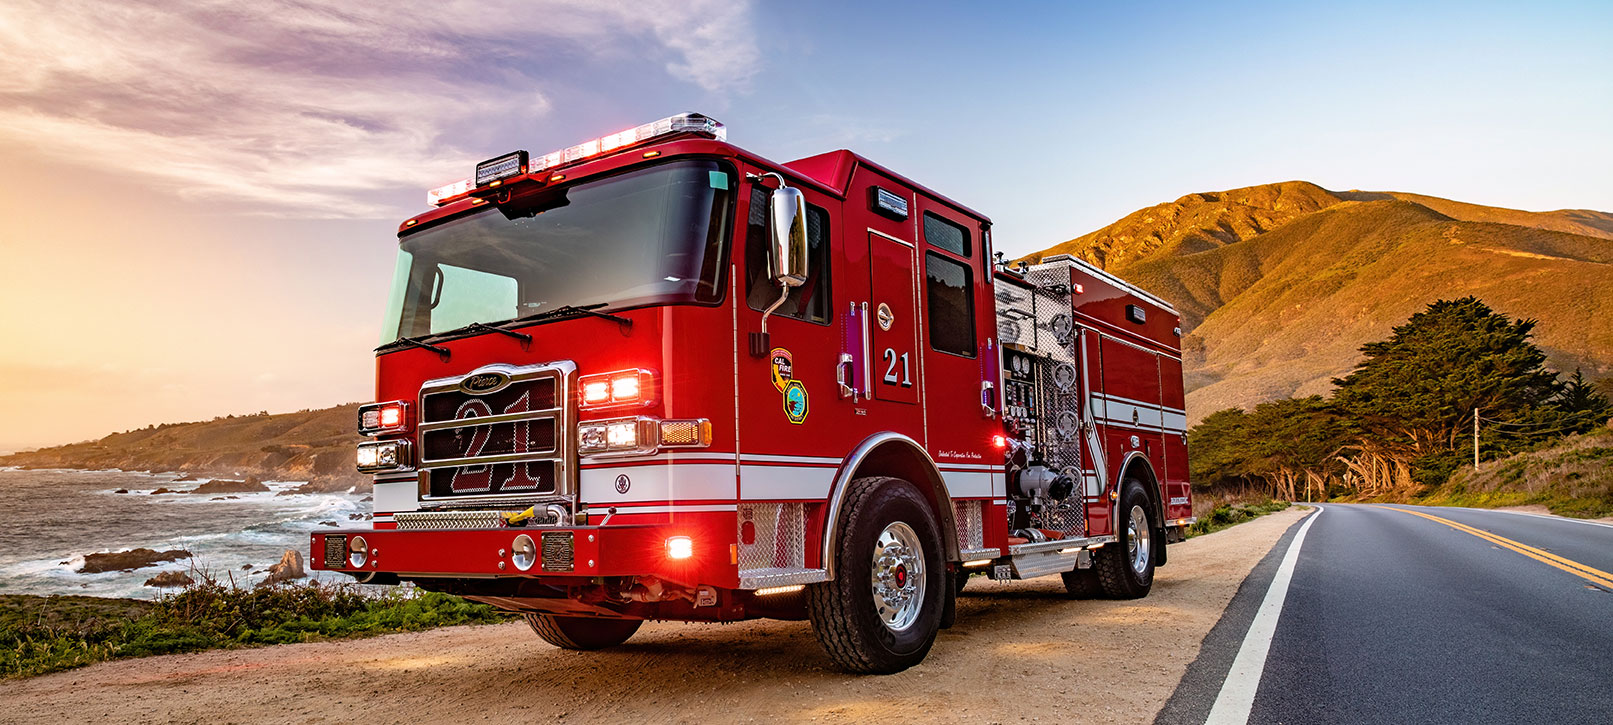 Pierce Fire Truck parked on the side of the road near the ocean with a TAK-4® Independent Front Suspension System. 